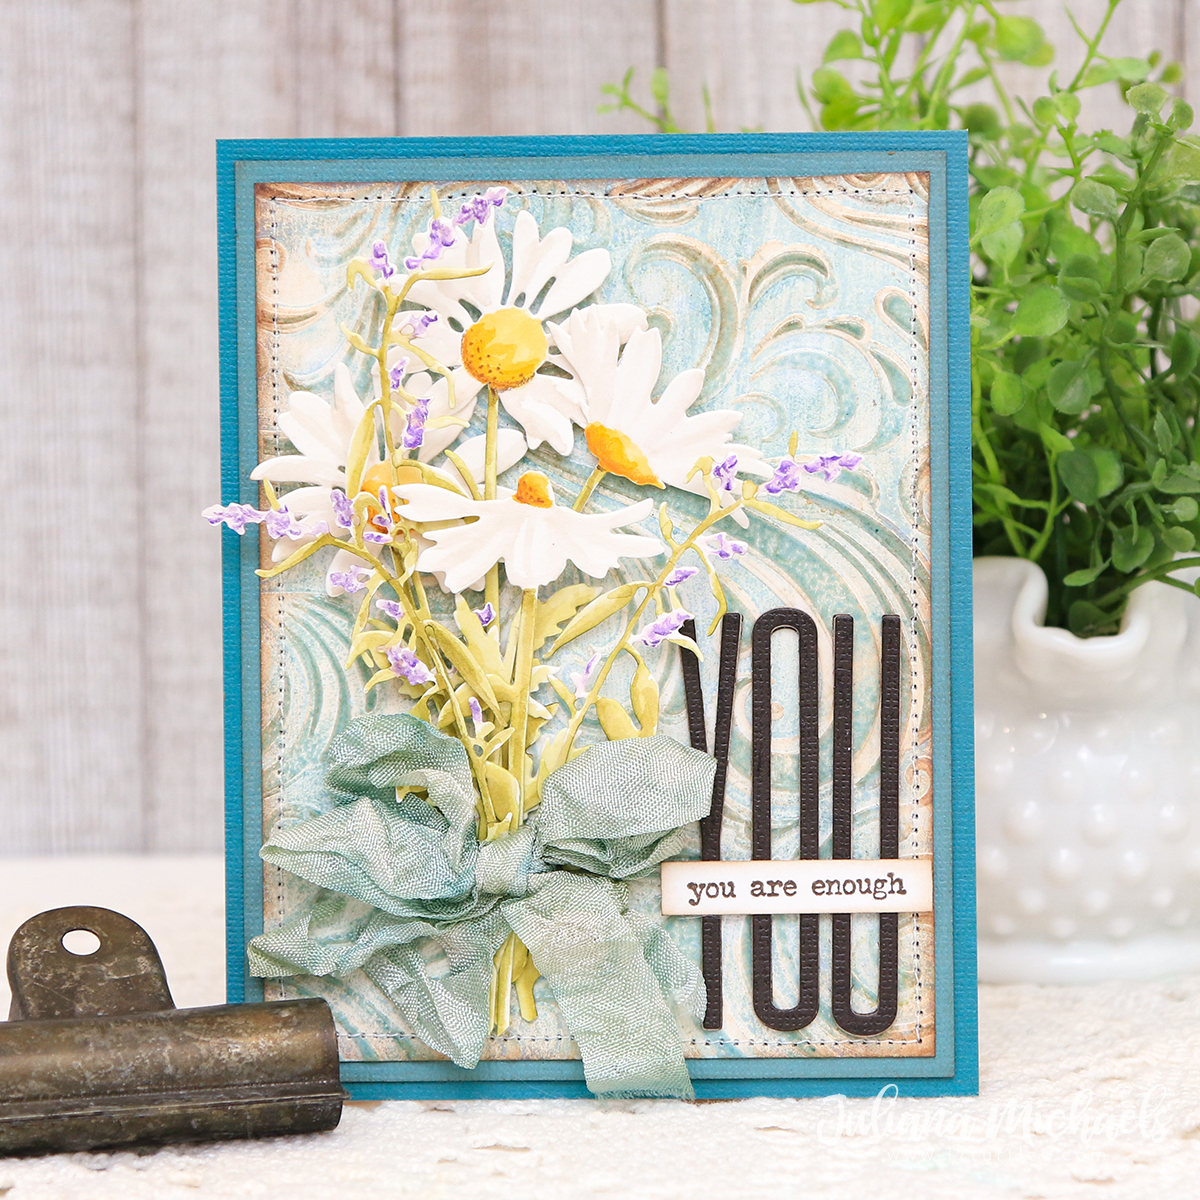 Latter Modsigelse Tæller insekter You Are Enough Card | Tim Holtz Wildflower Stems 3, Alphanumeric Stretch  Thinlits and Swirls Texture Fade - 17turtles Juliana Michaels